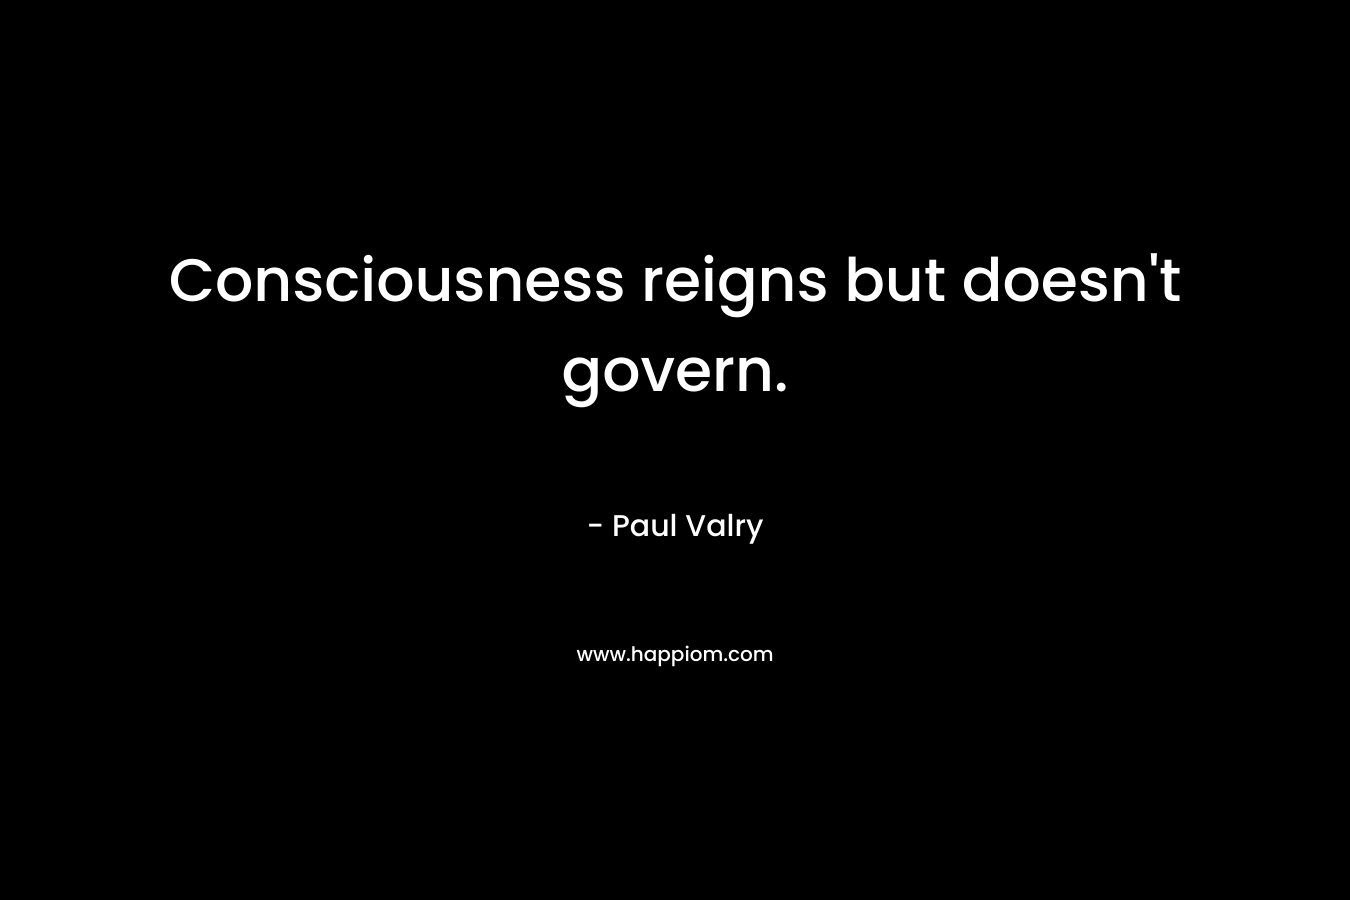 Consciousness reigns but doesn’t govern. – Paul Valry